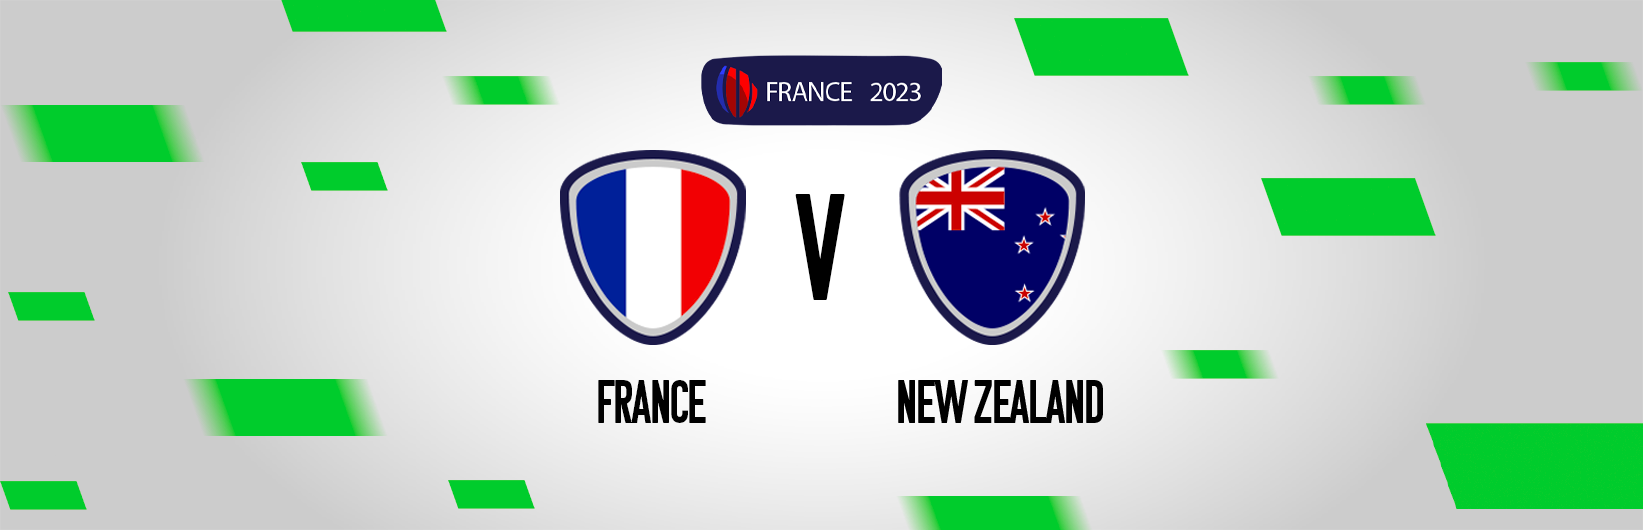 Rugby World Cup tips: Best bets for France v New Zealand